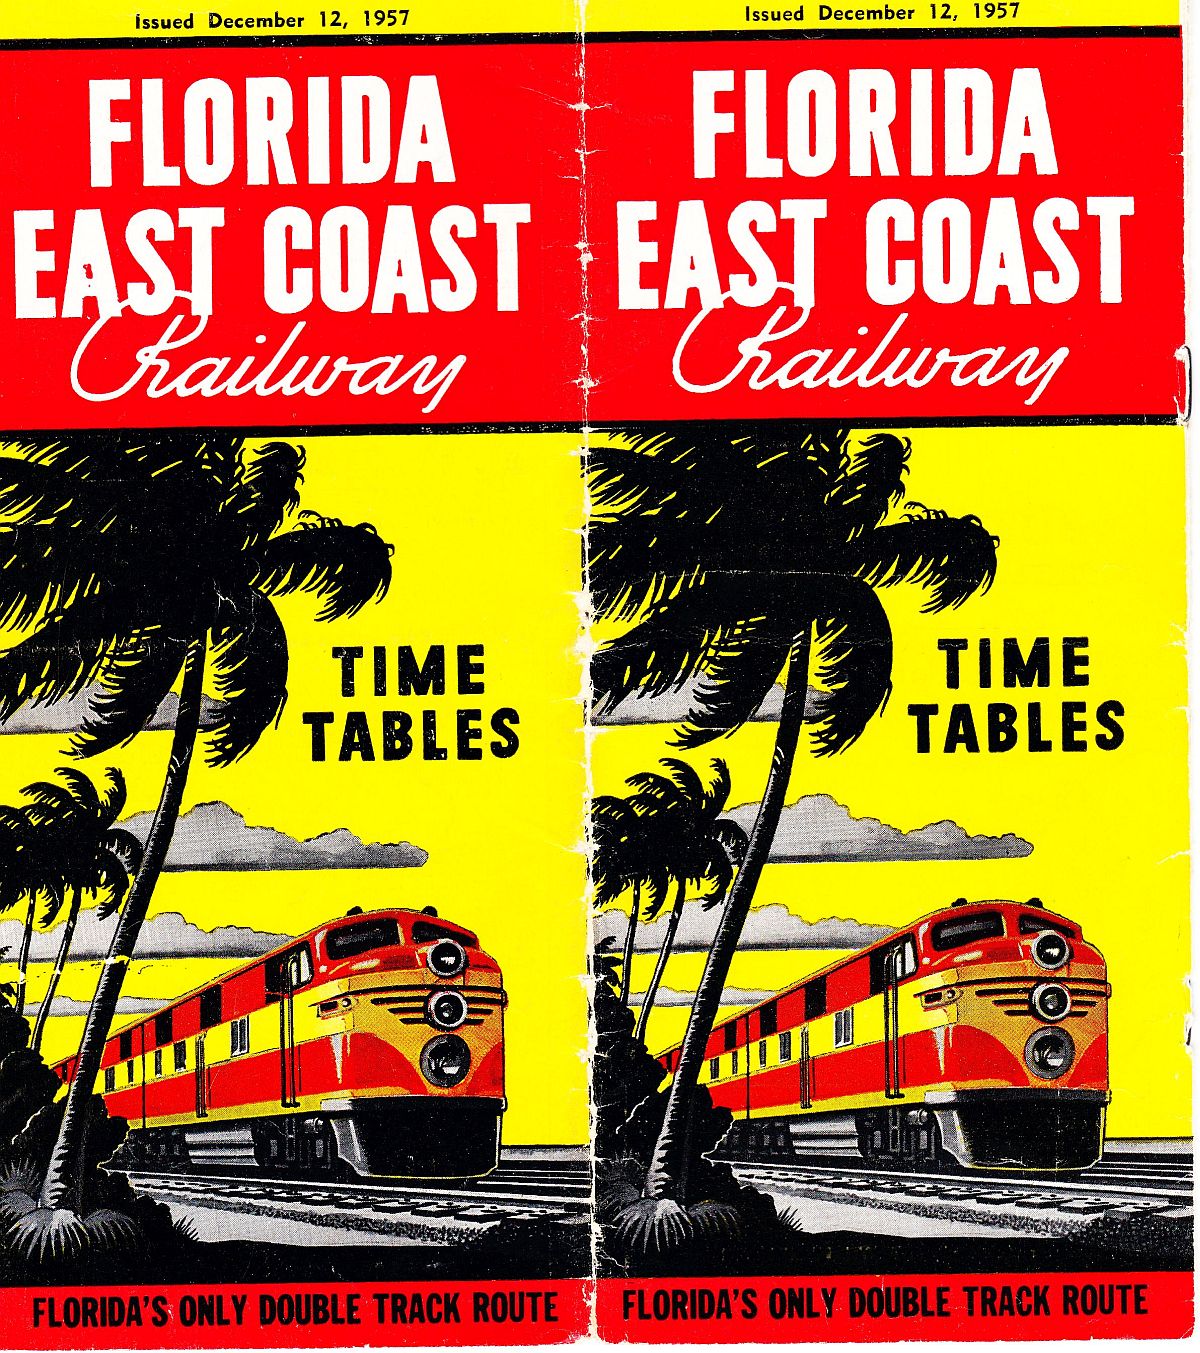 Florida East Coast Railway Dec. 12, 1957 timetable Cover: F.E.C. Timetable Florida's only double track route - Issued December 12, 1957